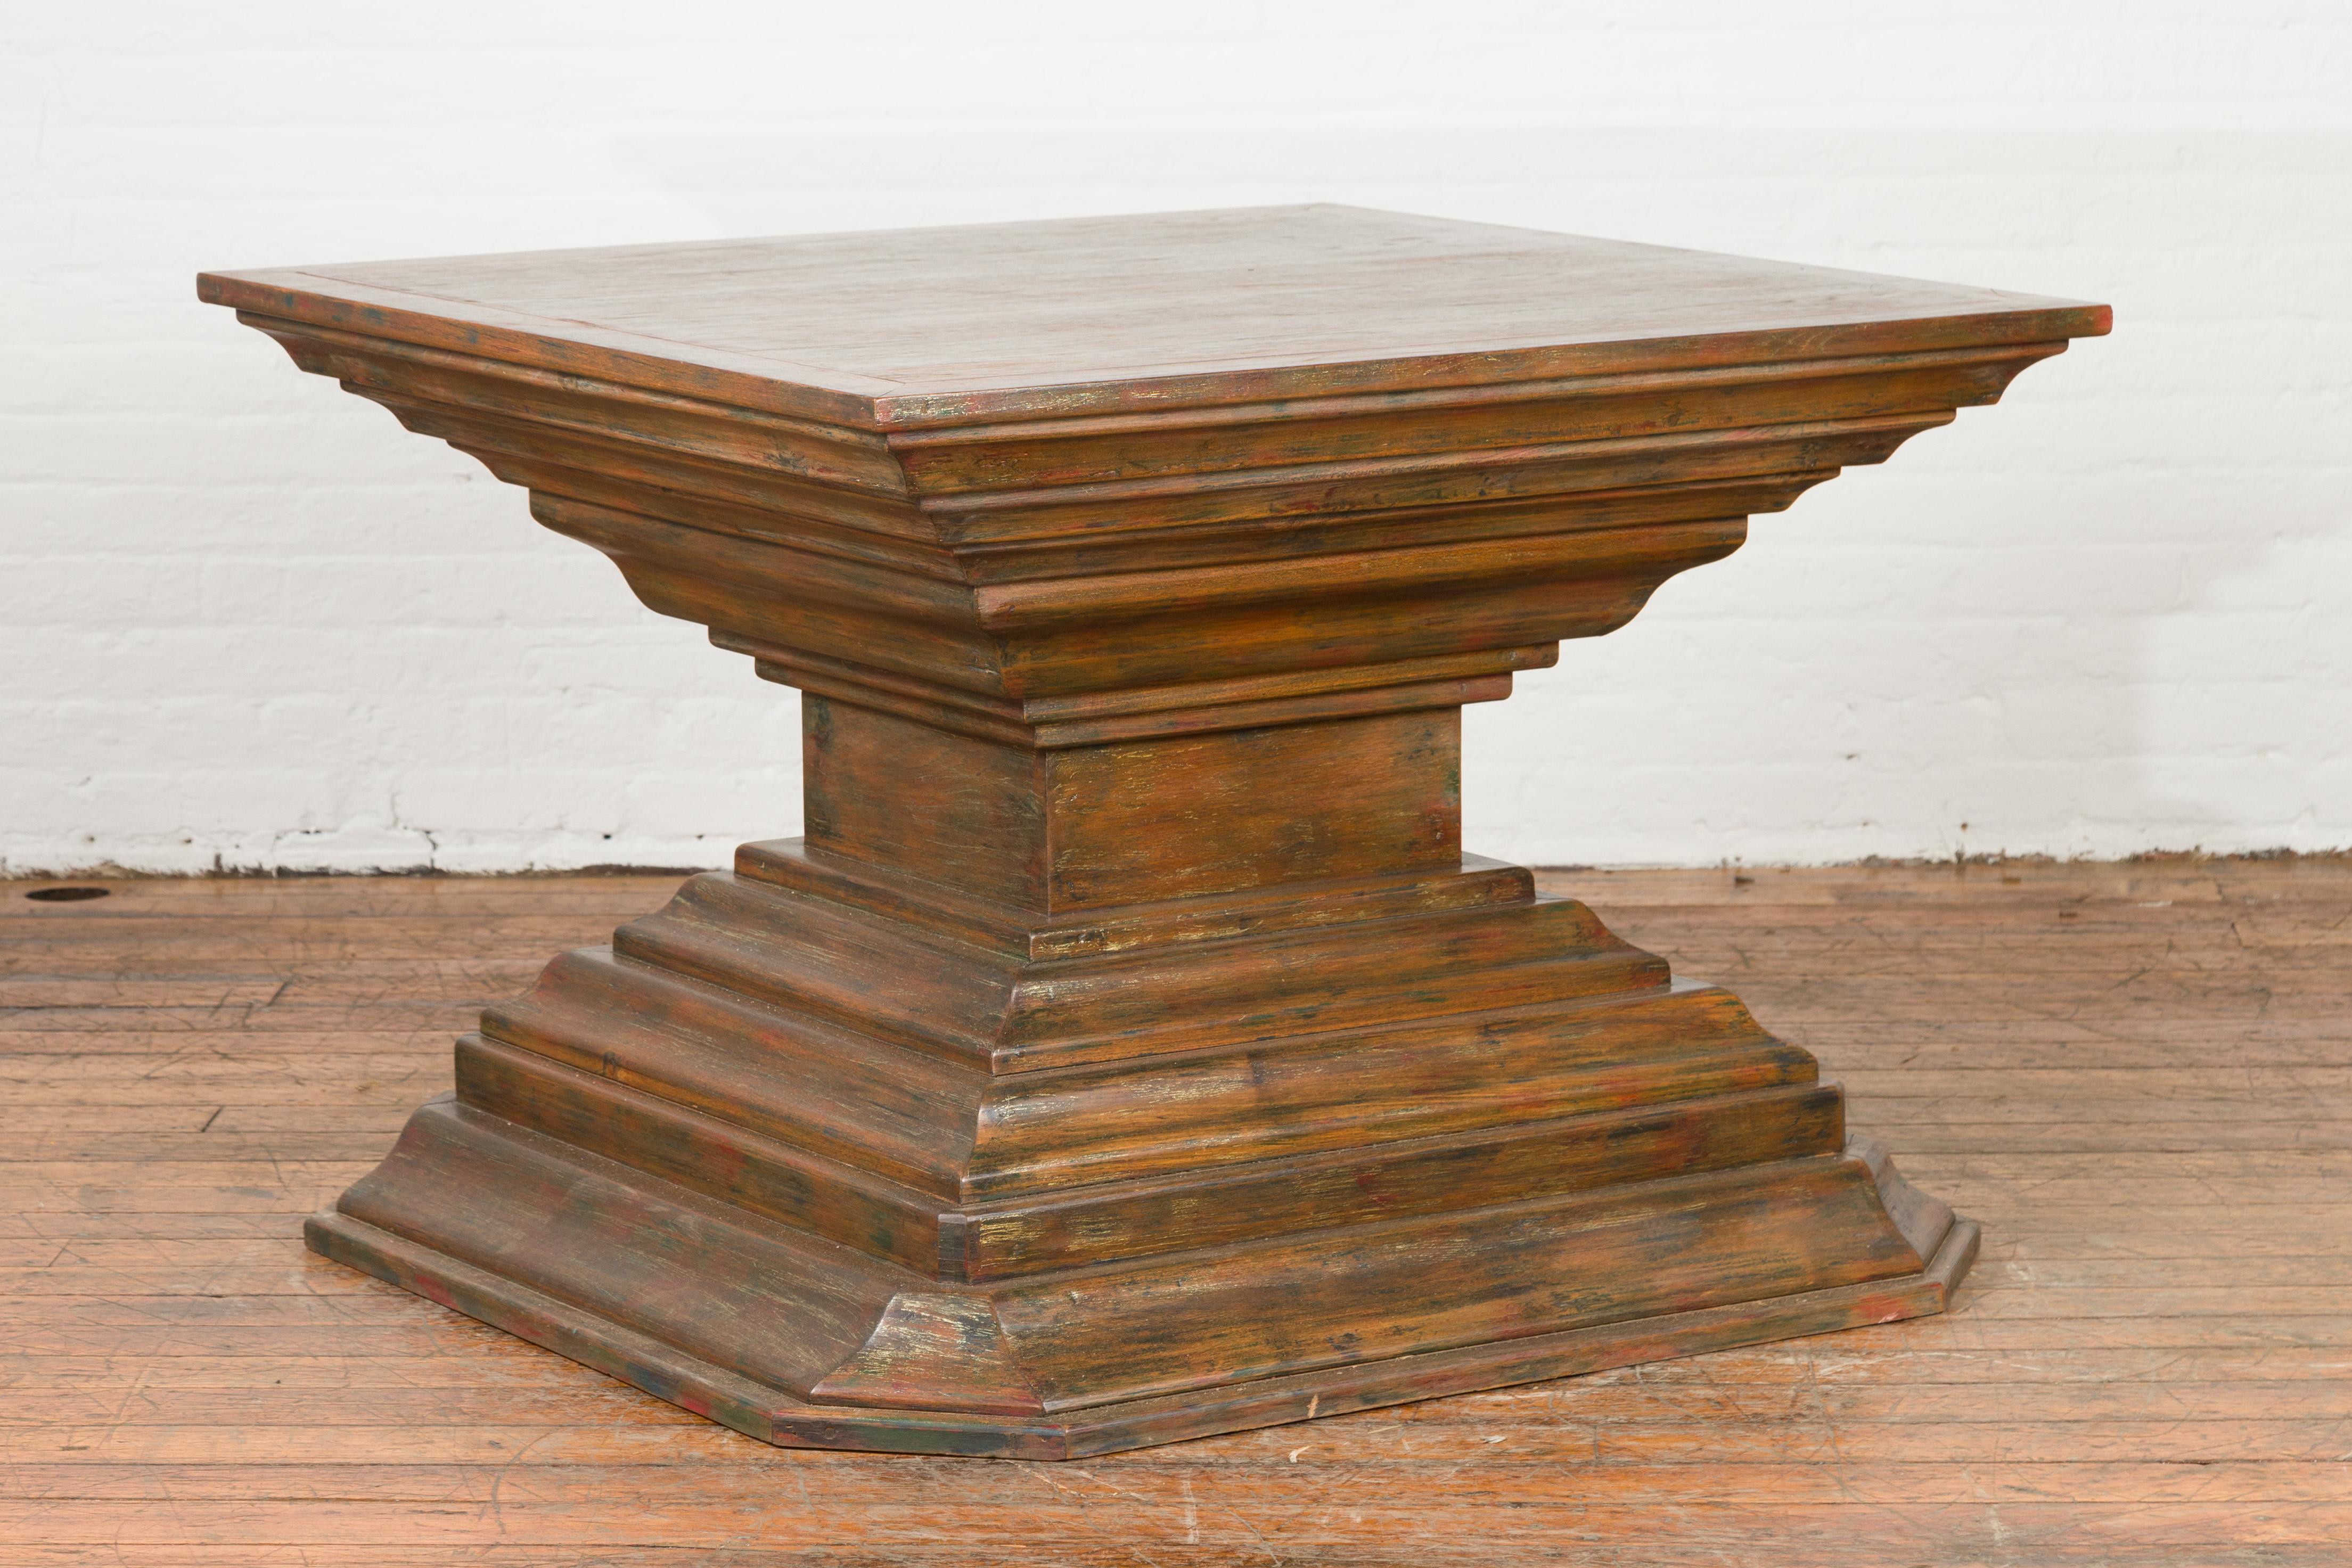 Indonesian Vintage Pagan Dynasty Style Pyramid-Shaped Console Pedestal Table In Good Condition For Sale In Yonkers, NY